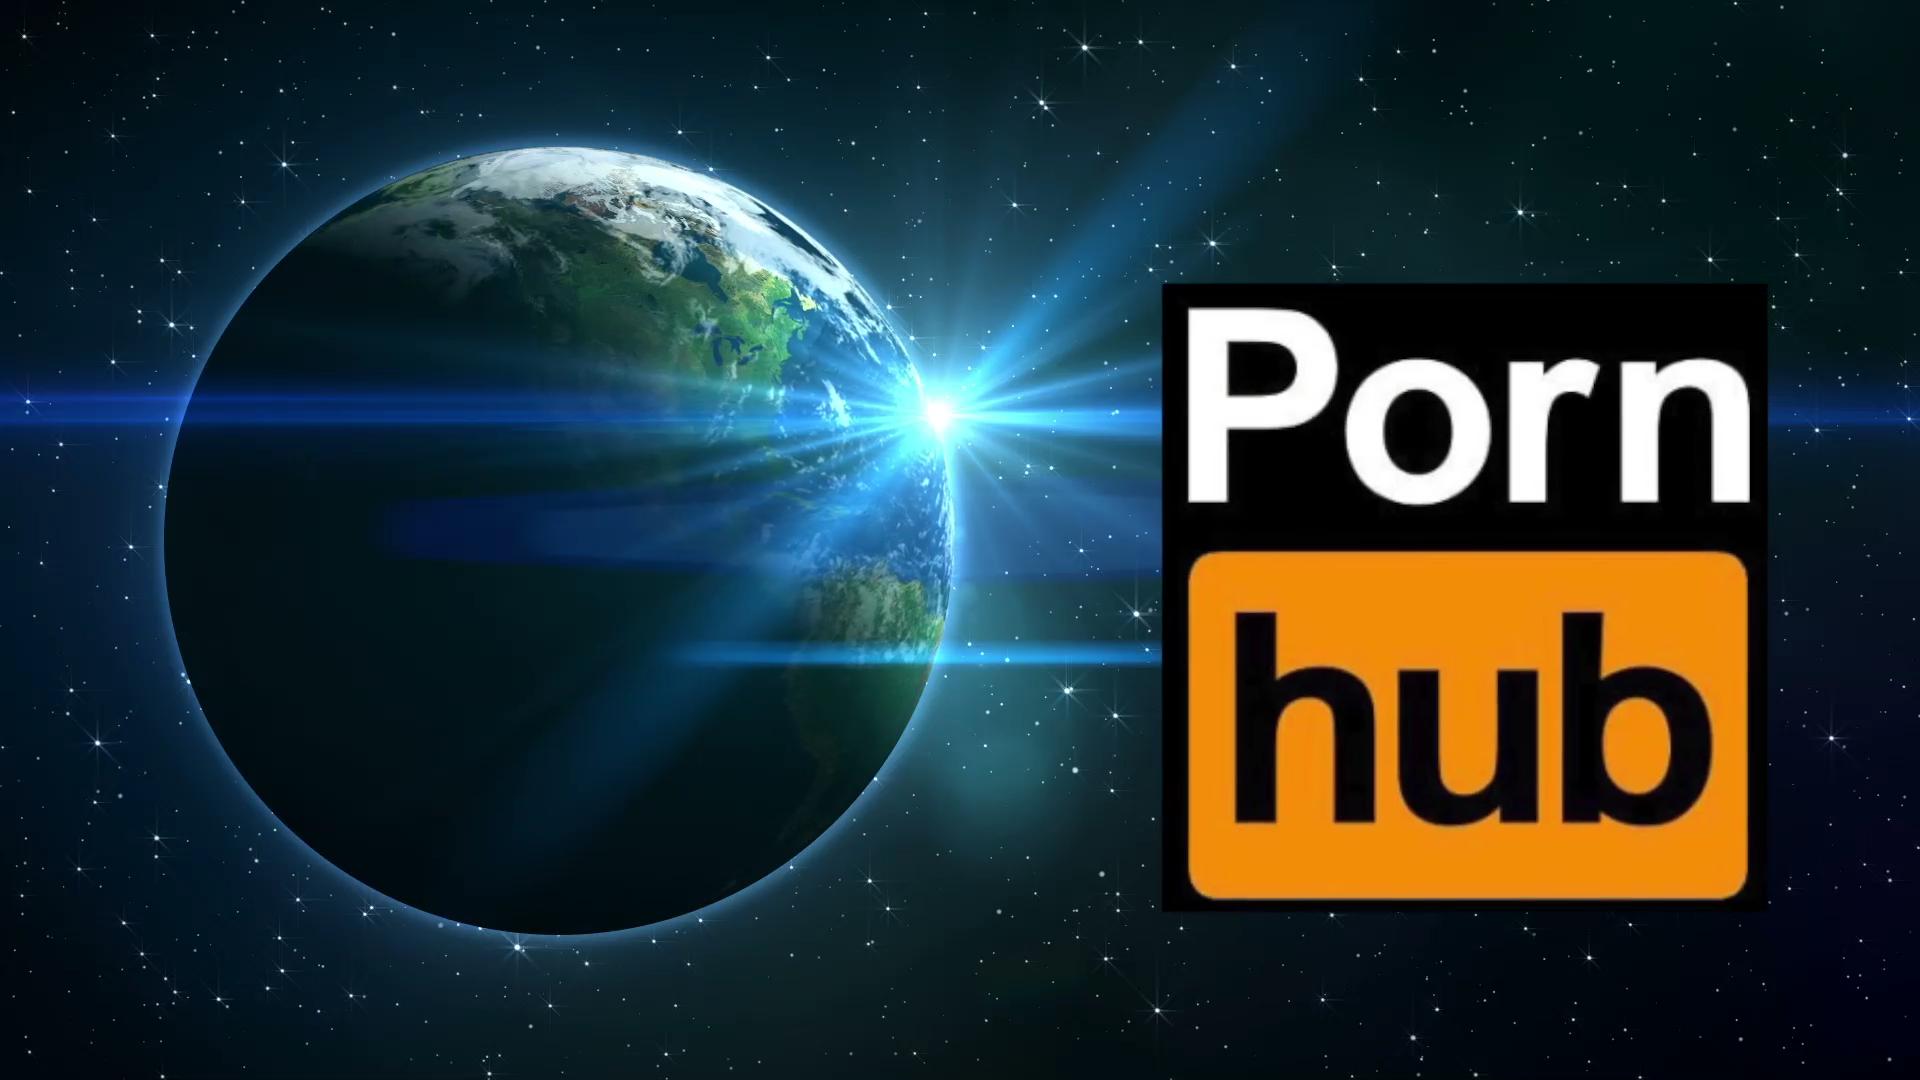 PornHub crowdfunding to make sex tape in space